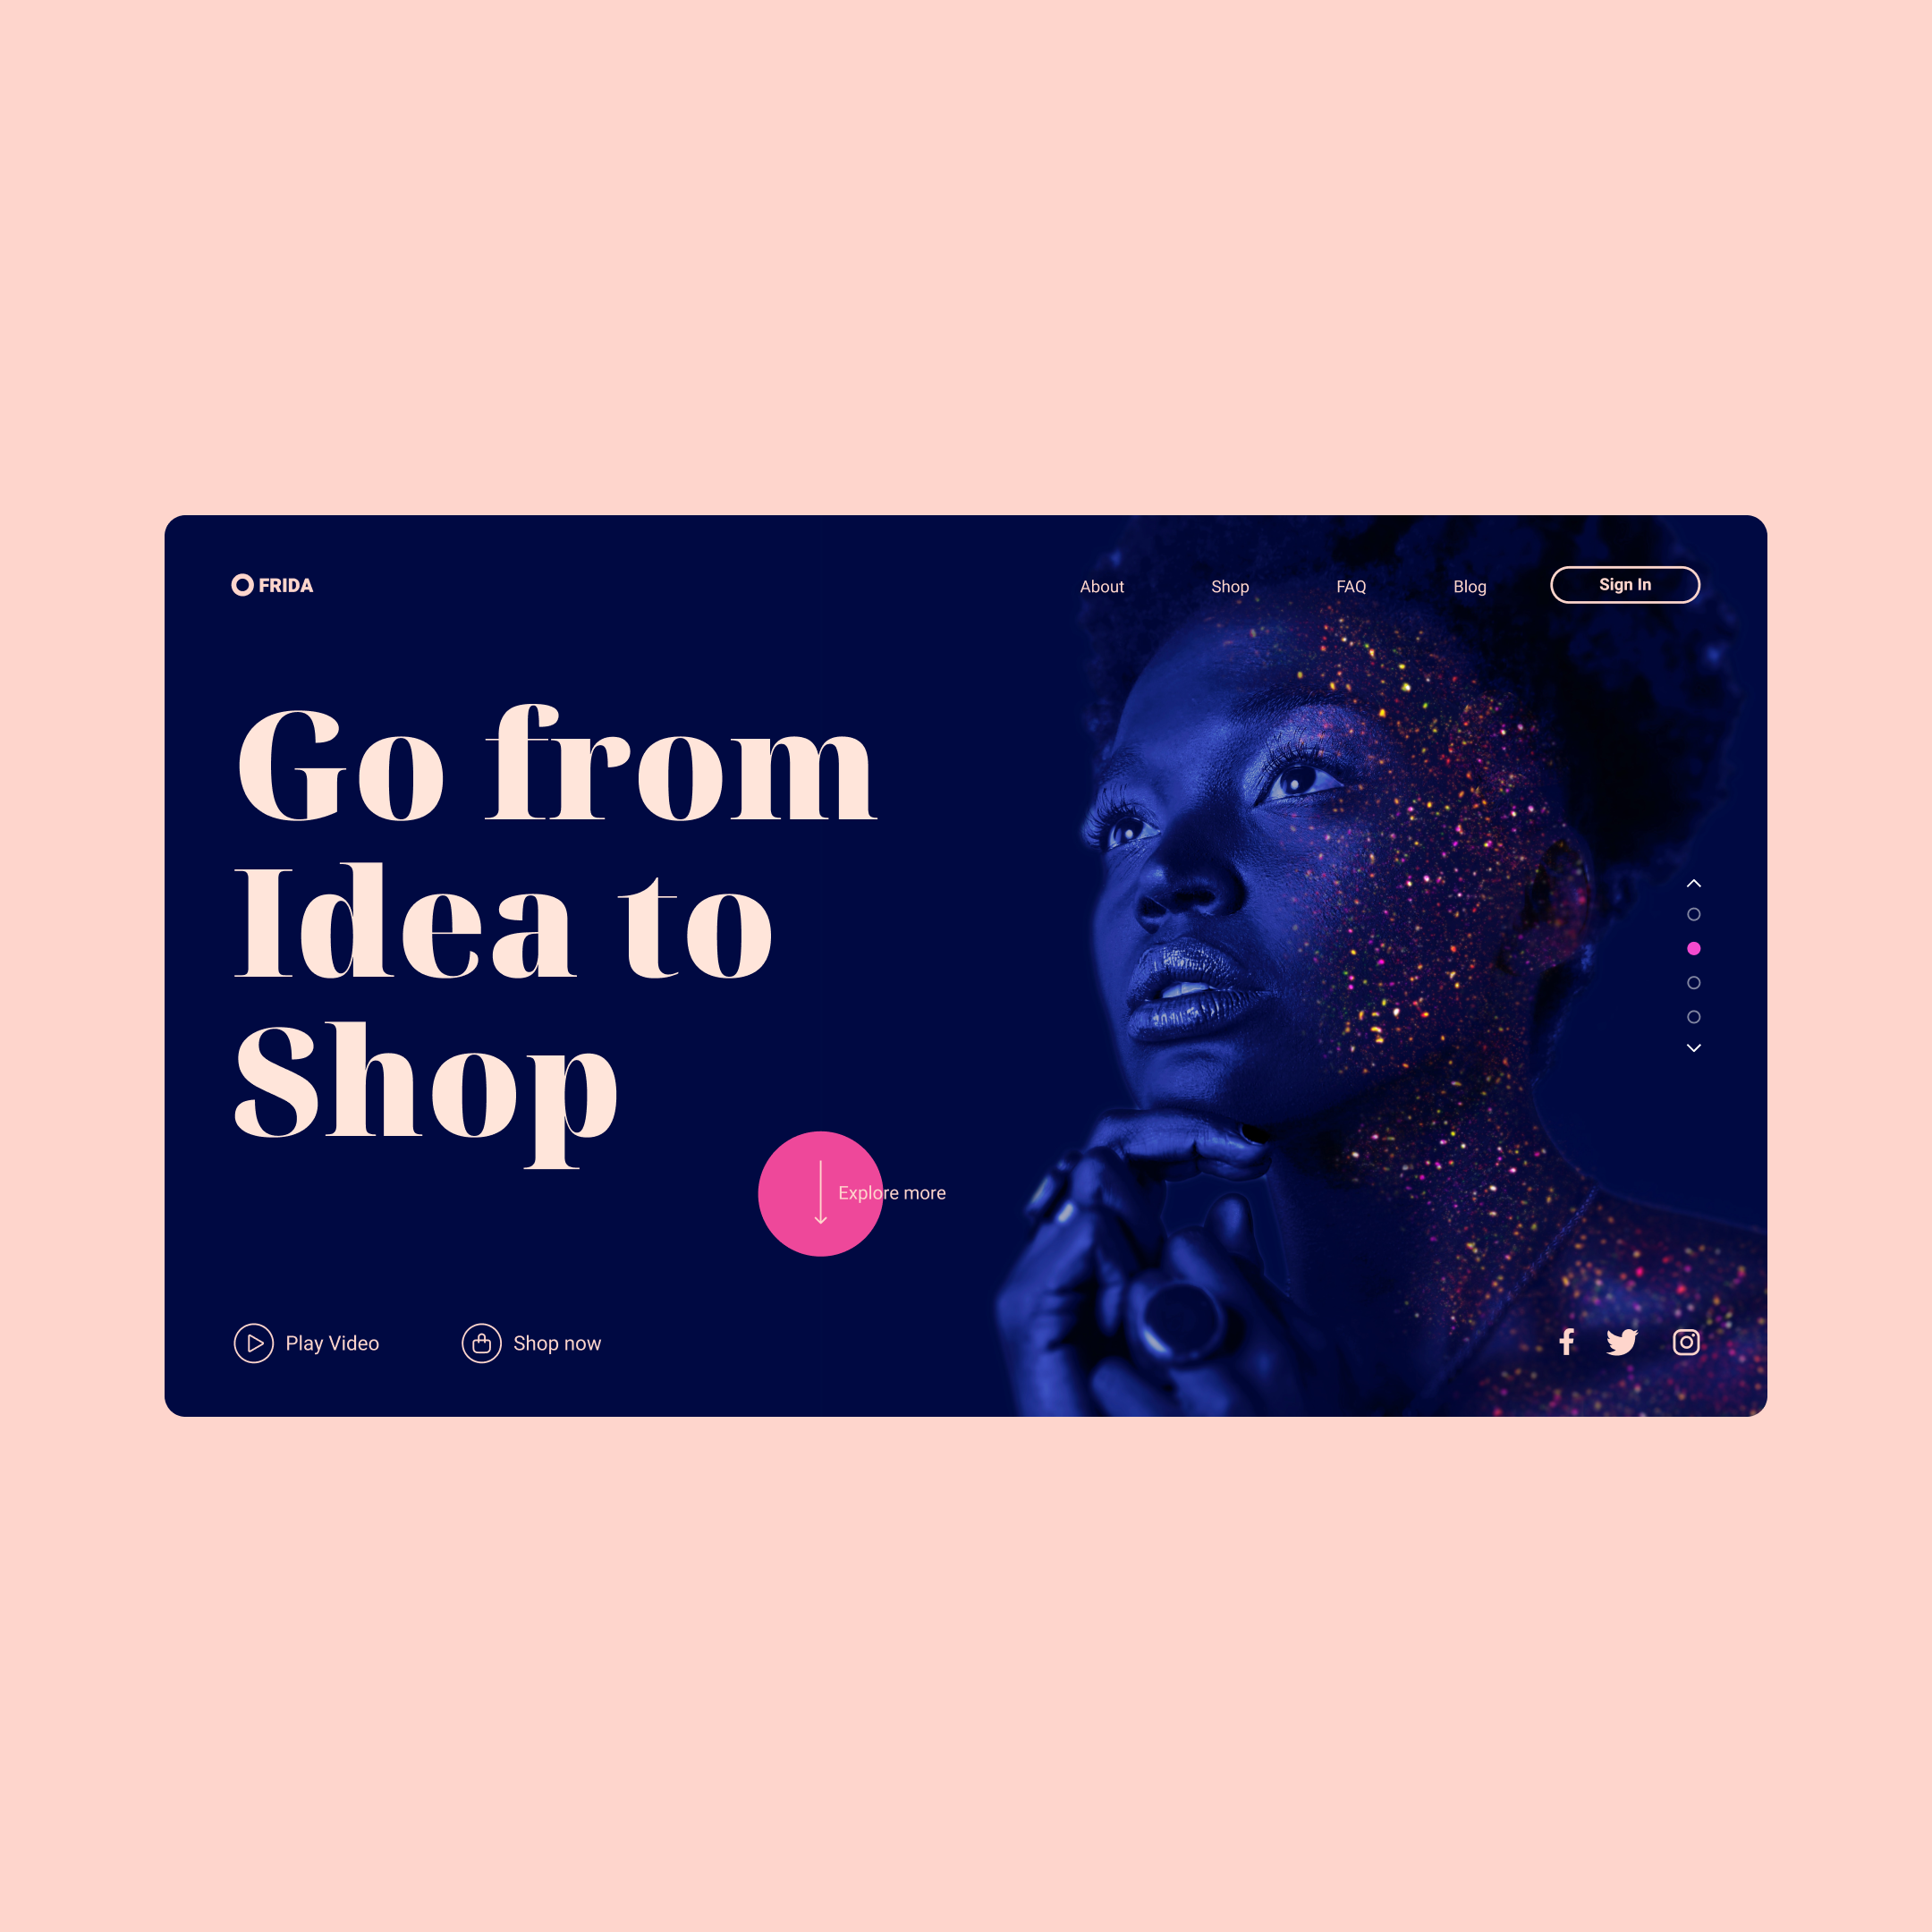 Go from Idea to Shop